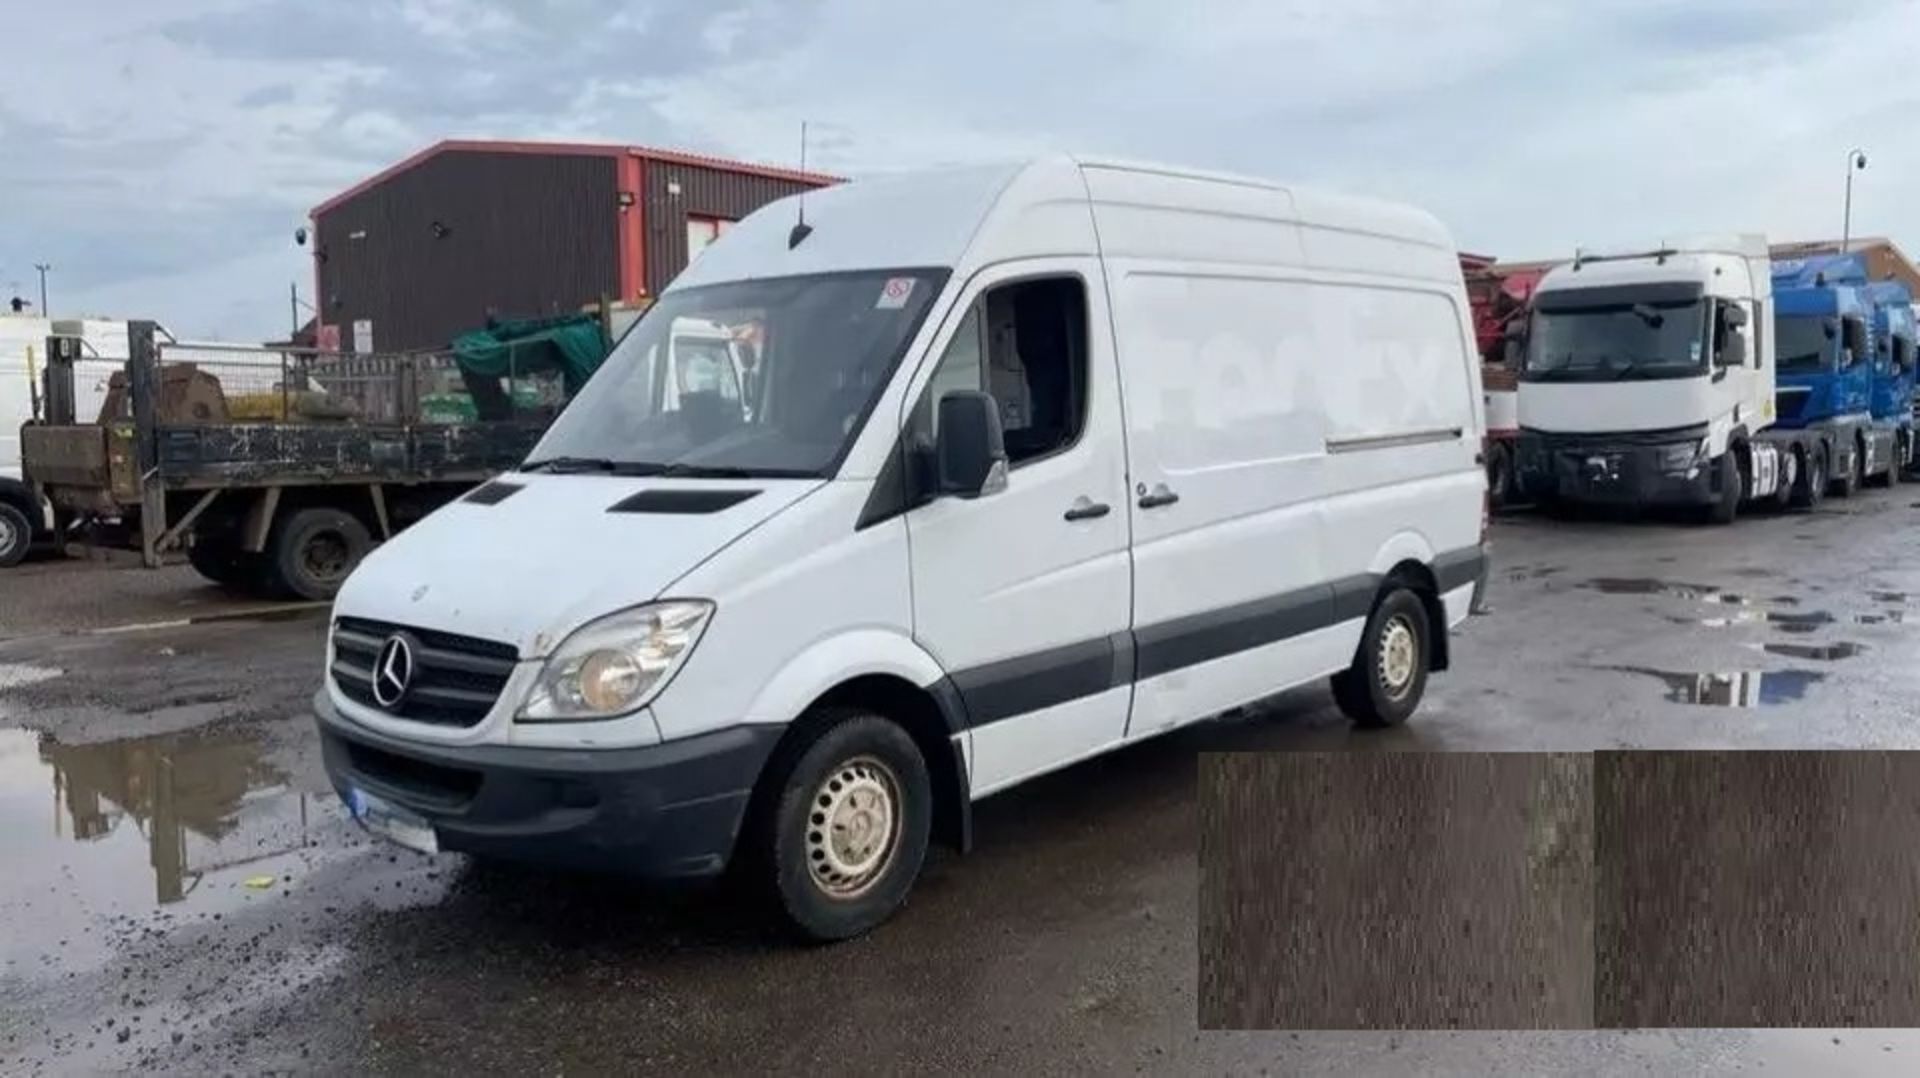 MERCEDES-BENZ SPRINTER 2013 - DIRECT FROM FEDEX, IDEAL FOR HEAVY DUTY